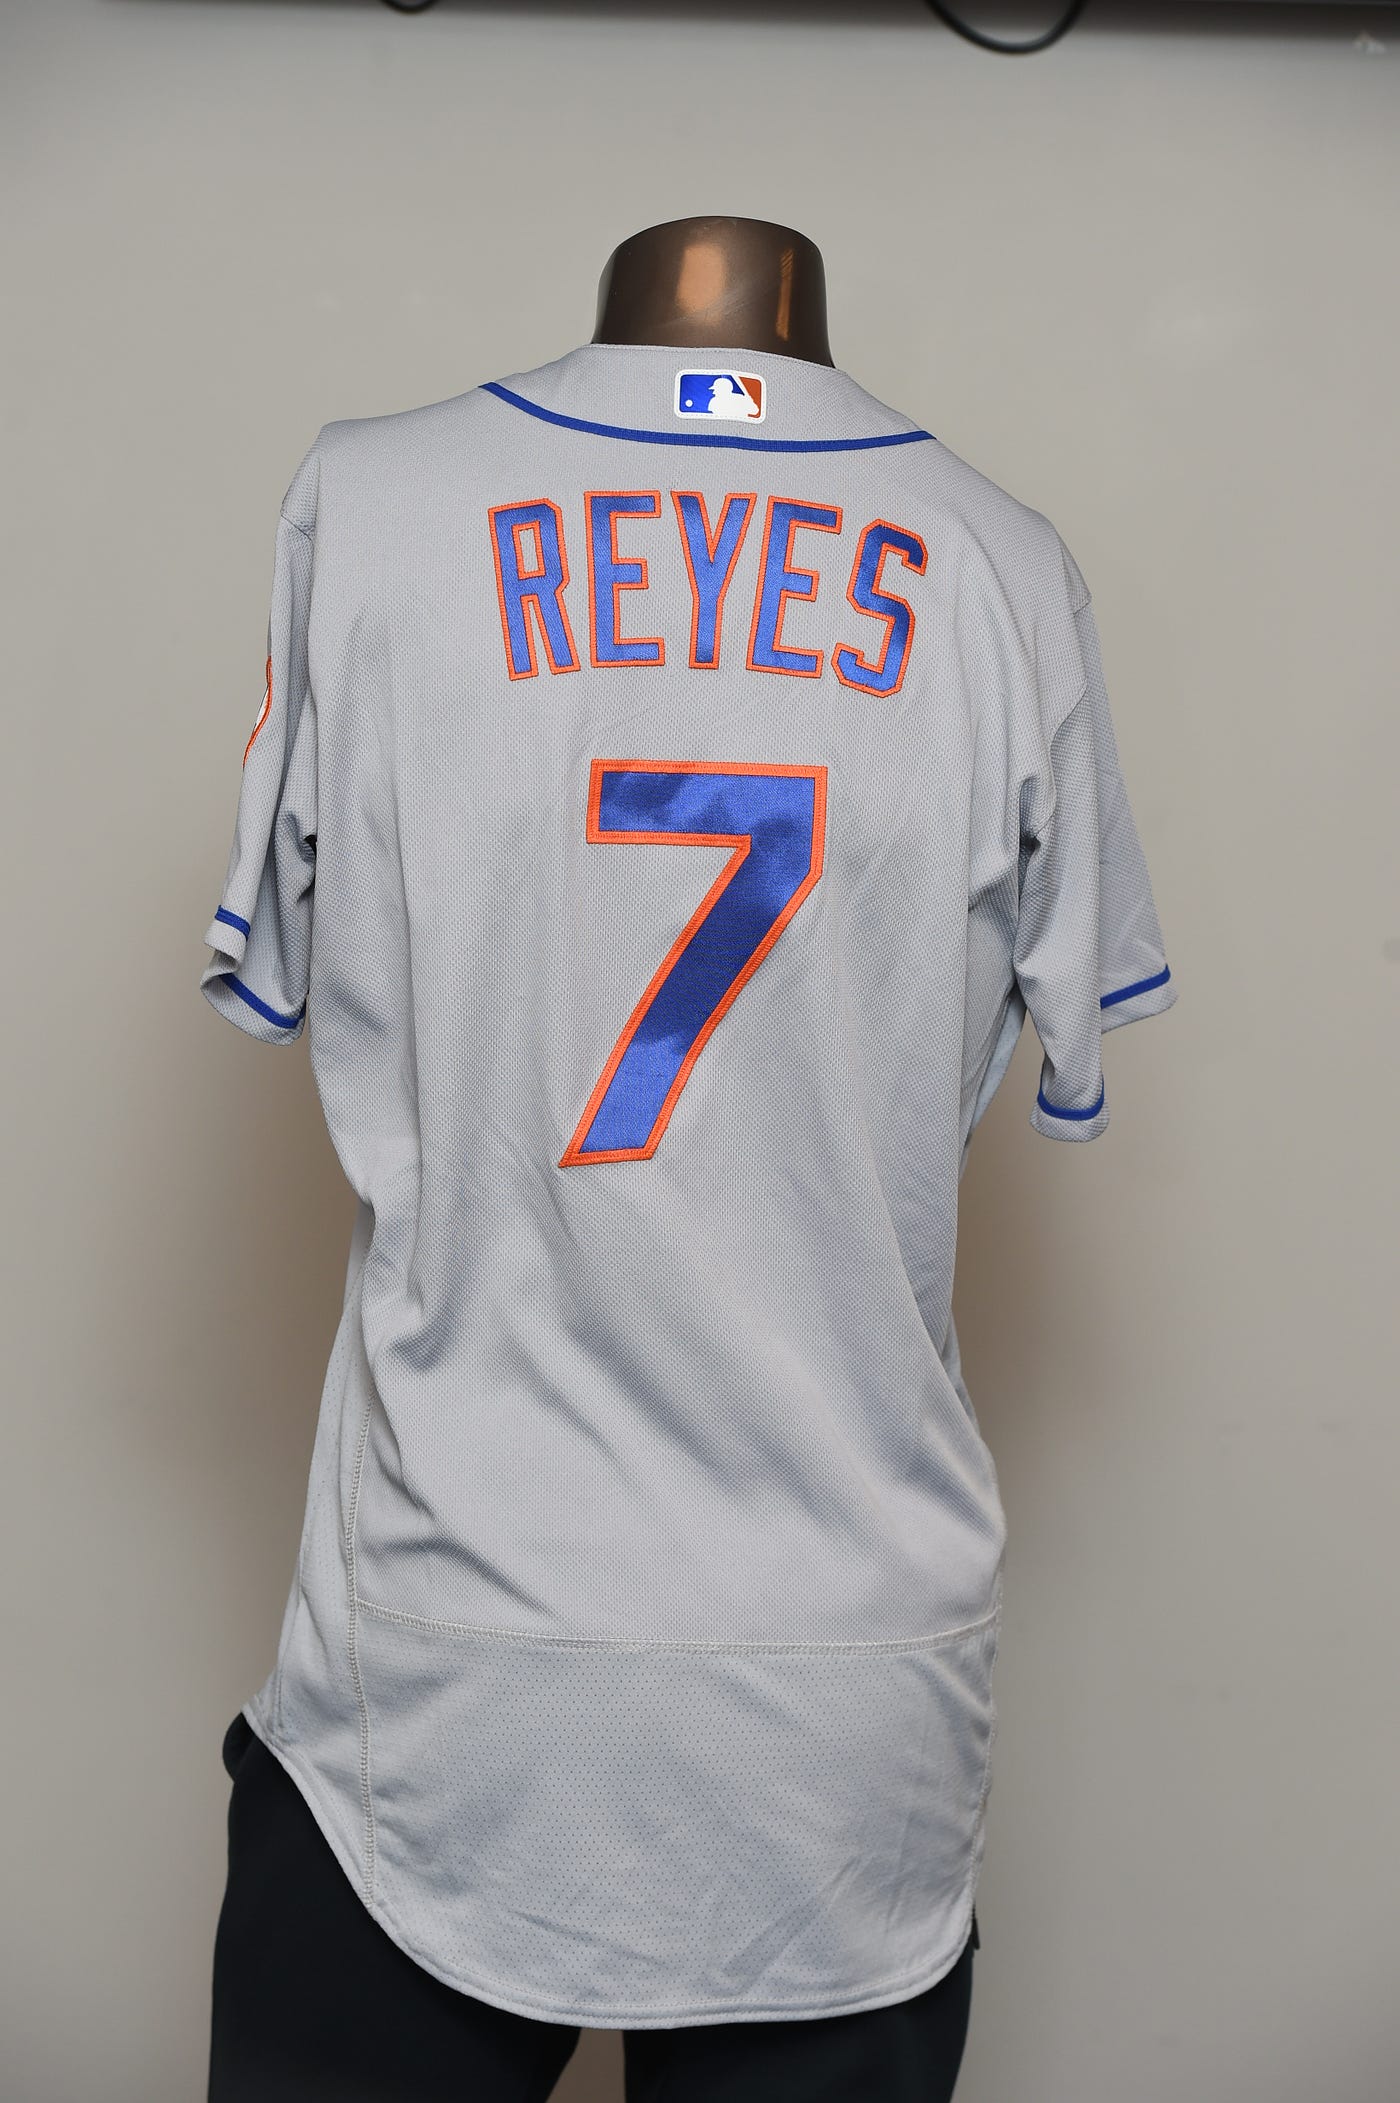 NY Mets Jose Reyes Youth Jersey | SidelineSwap